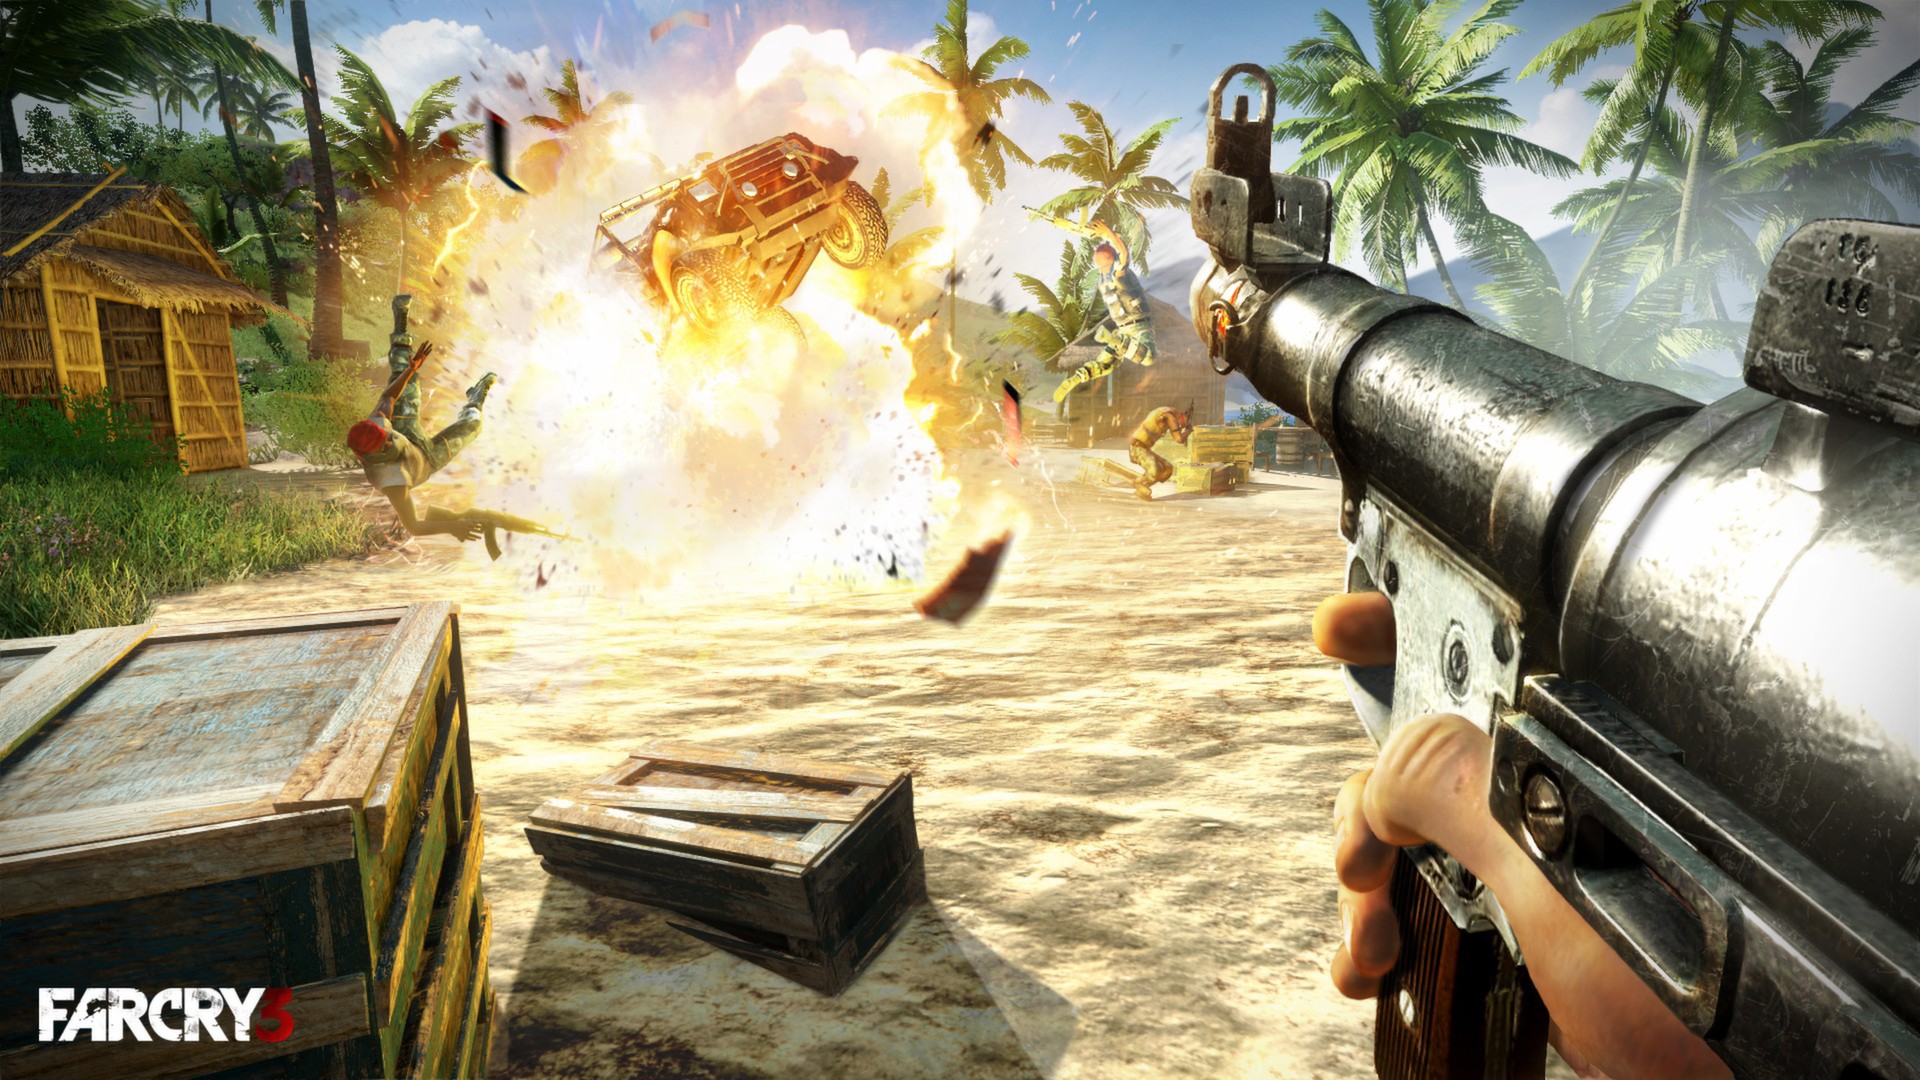 Download far cry 3 full